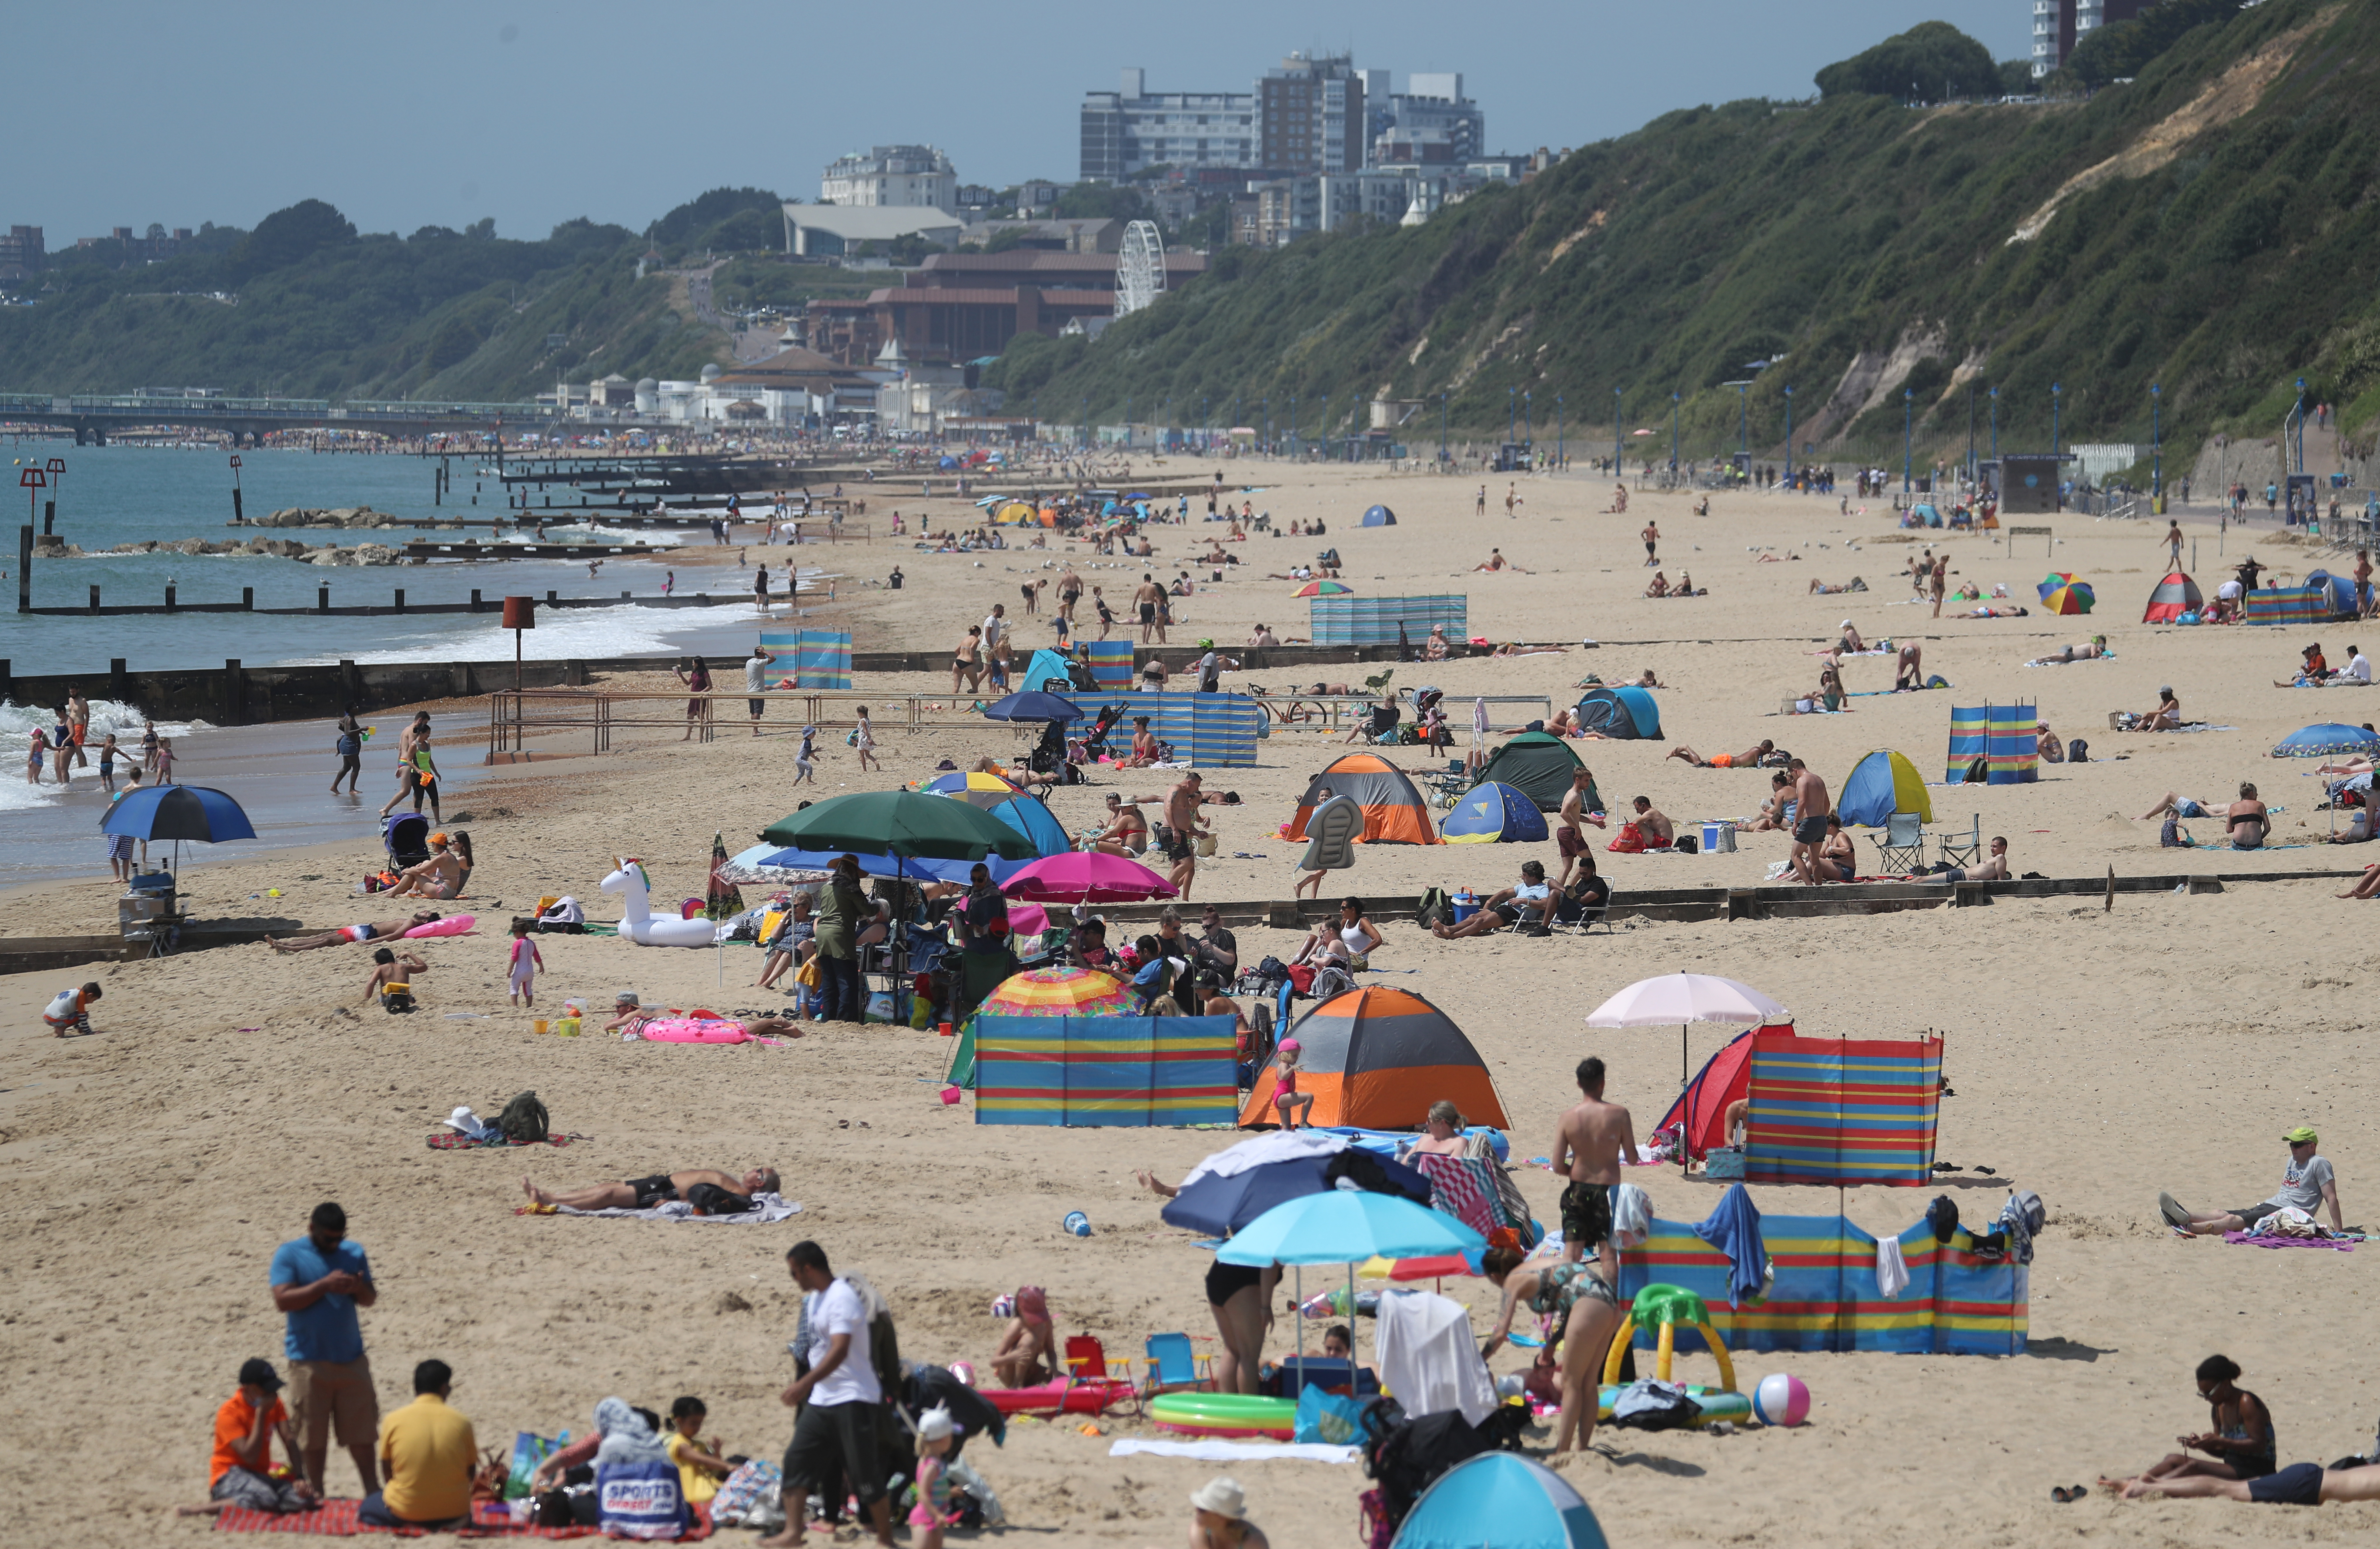 People visit the beach in Boscombe, as Britain is braced for a June heatwave as temperatures are set to climb into the mid-30s this week. (Photo by Andrew Matthews/PA Images via Getty Images)